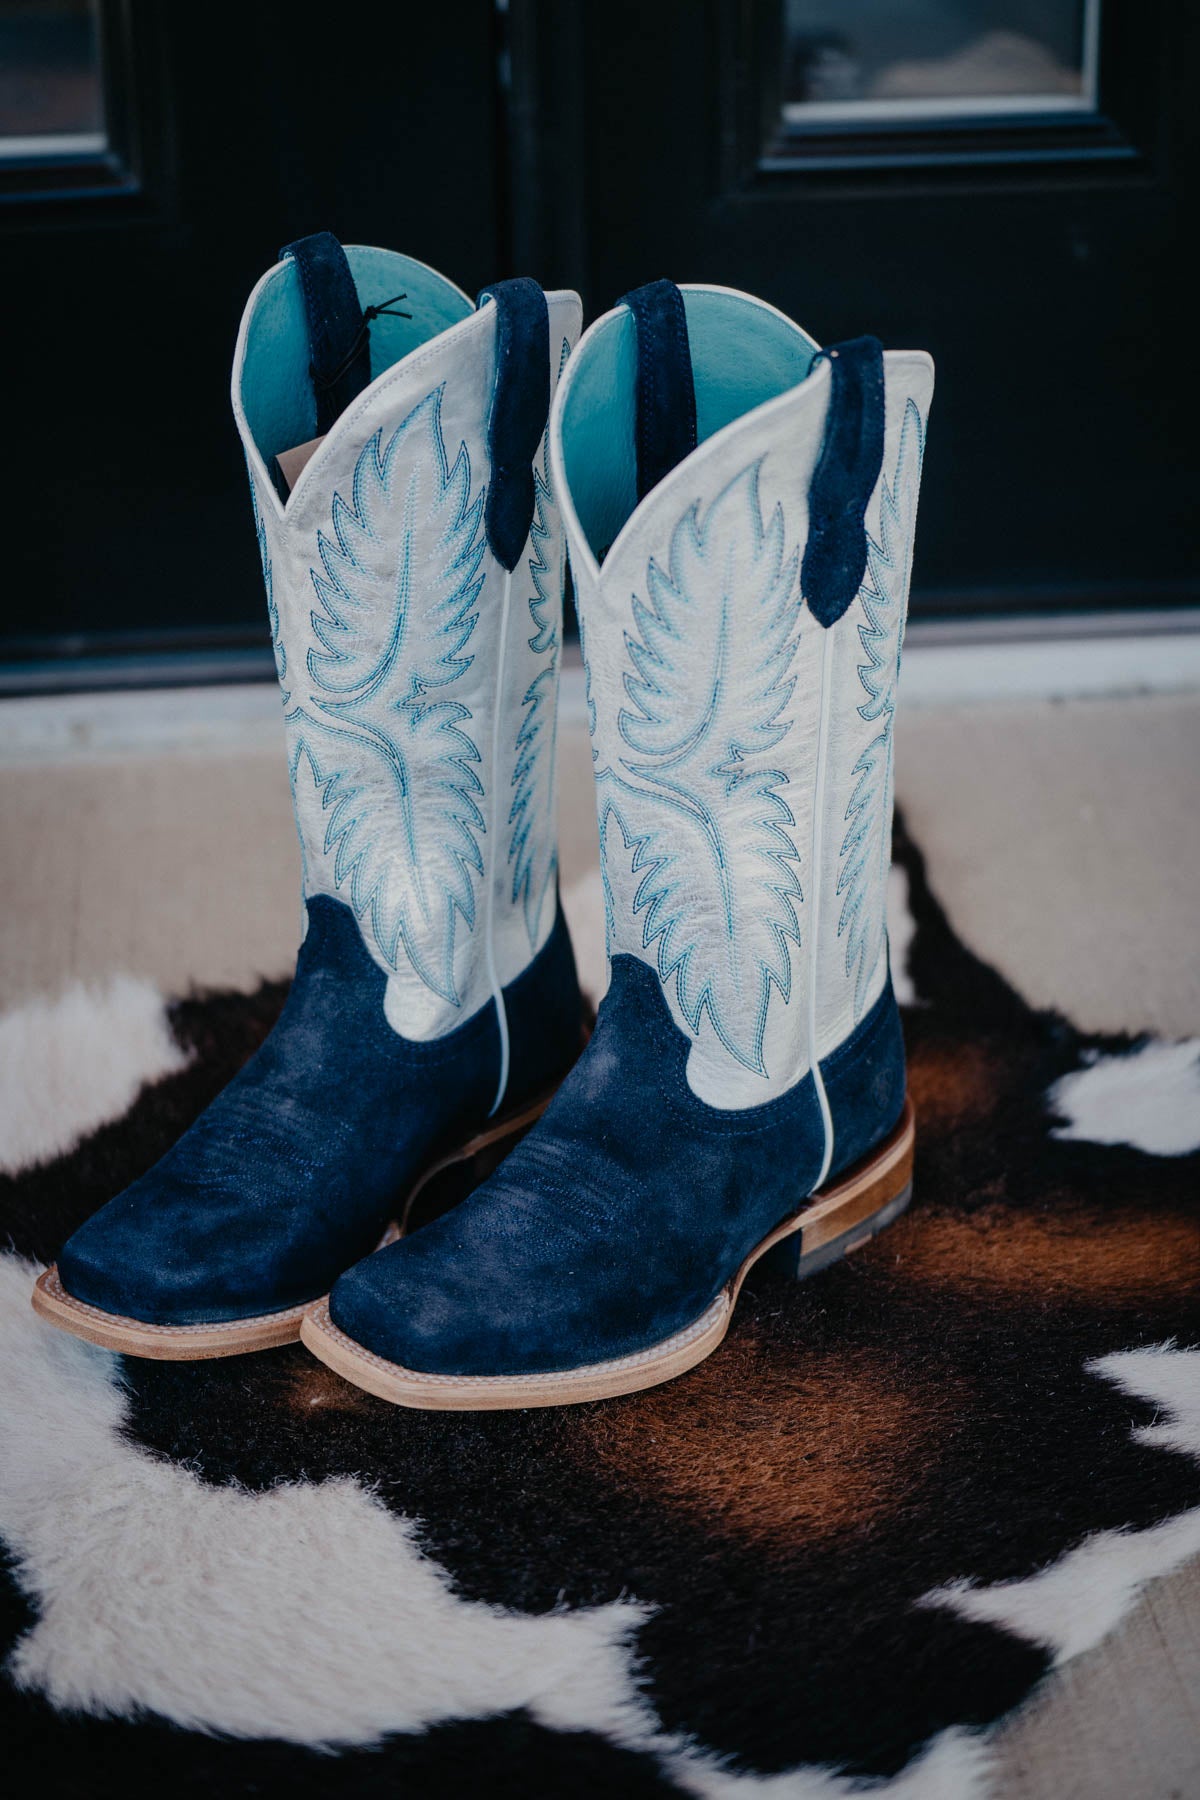 Ariat 'Frontier Calamity Jane' Western Boot - Polo Blue Roughout / Electric Silver (Sizes 6.5 -10, B Width)